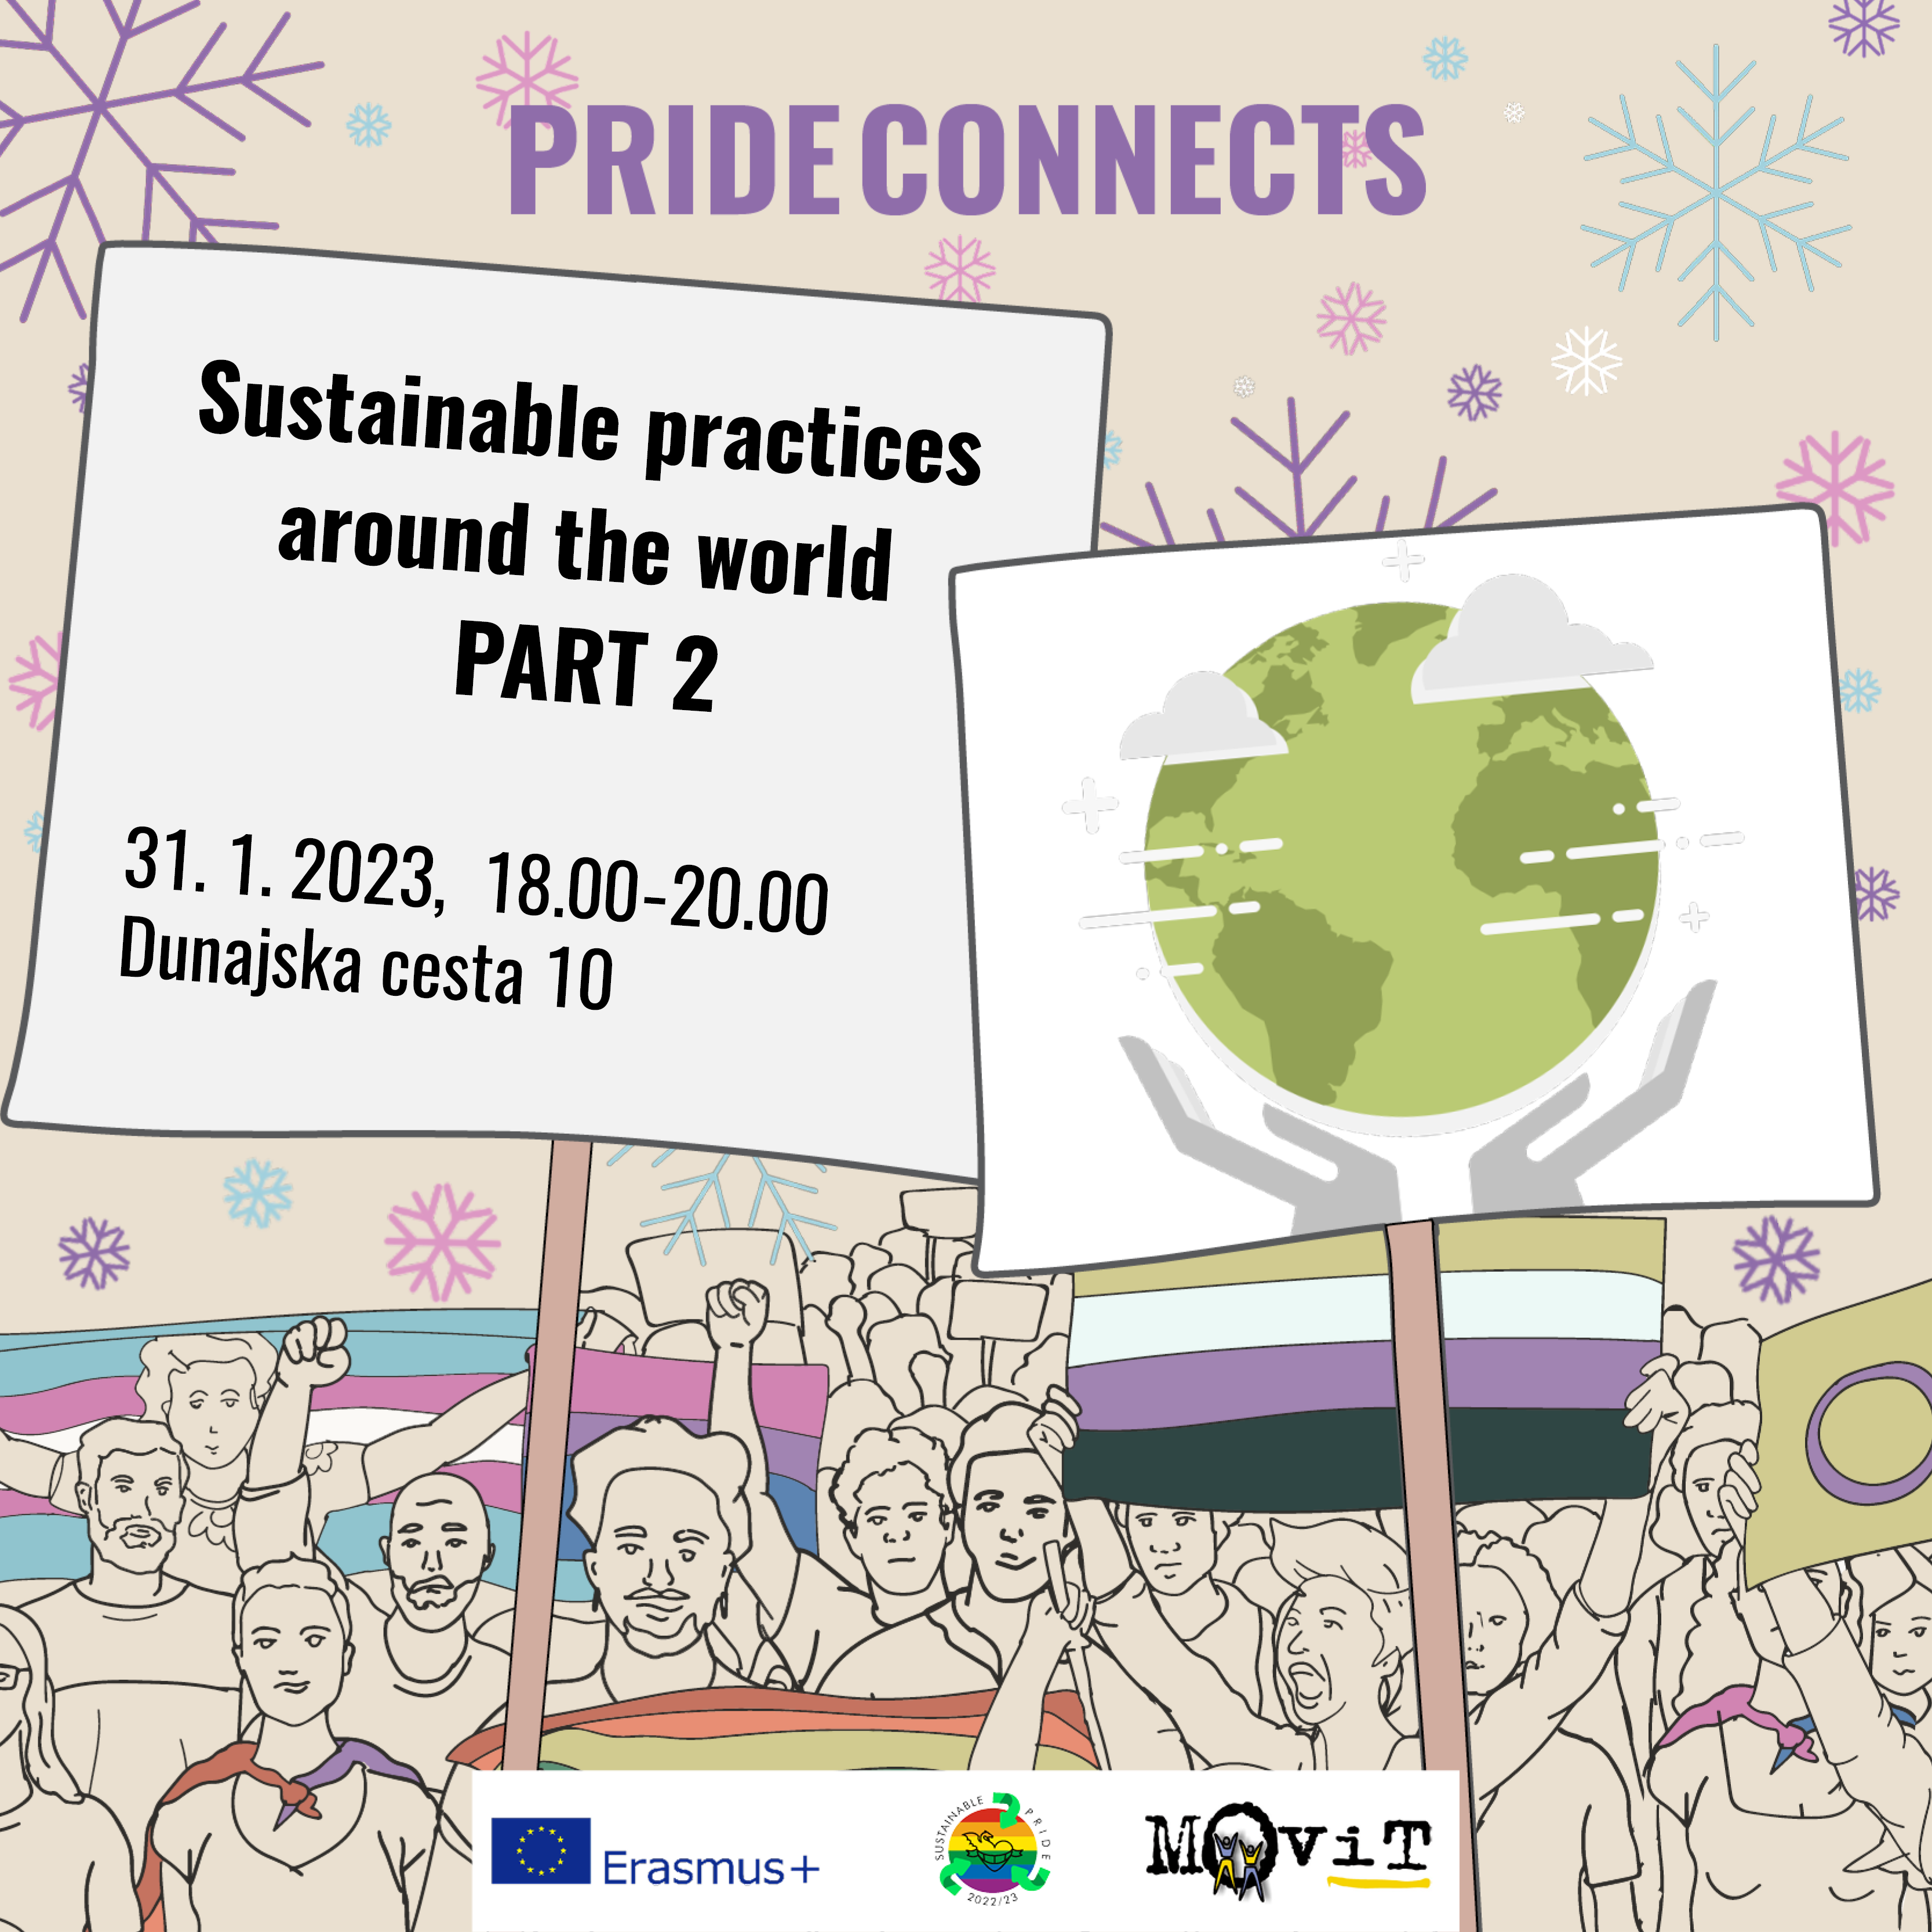 Pride connects: Sustainable practices around the world pt. 2